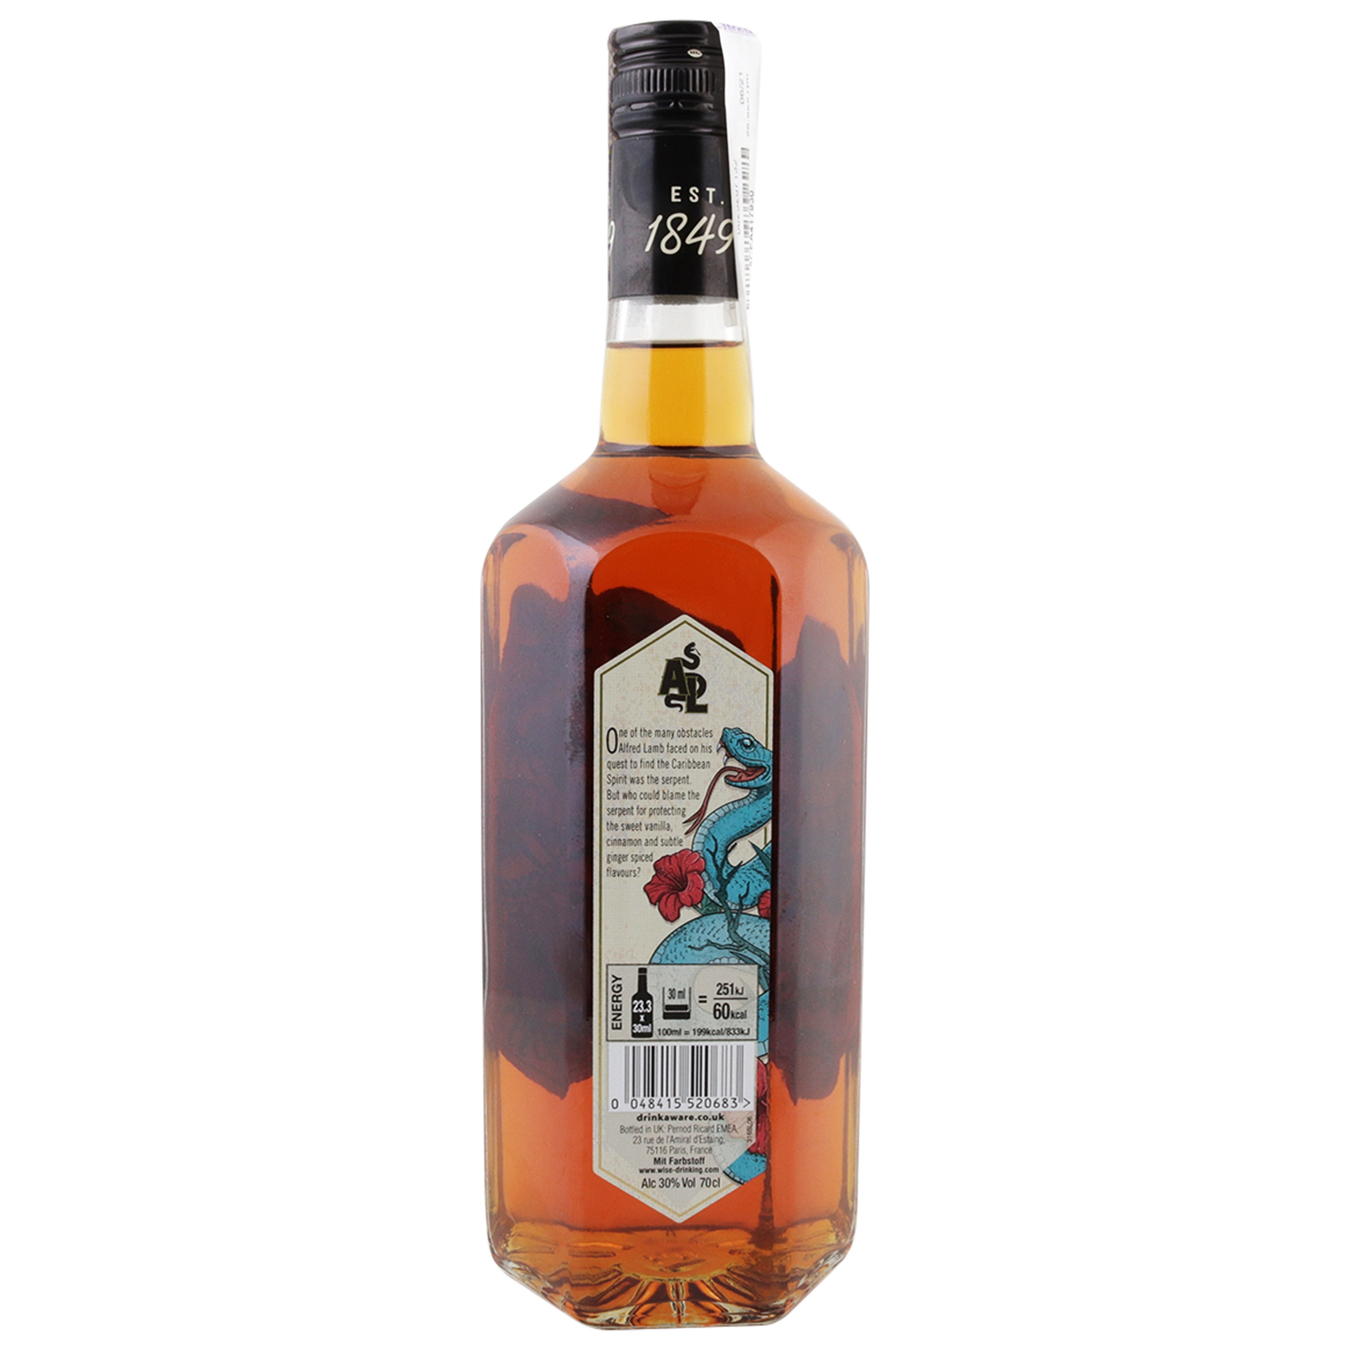 Lamb's Spiced strong alcoholic drink based on rum 30% 0,7l 2